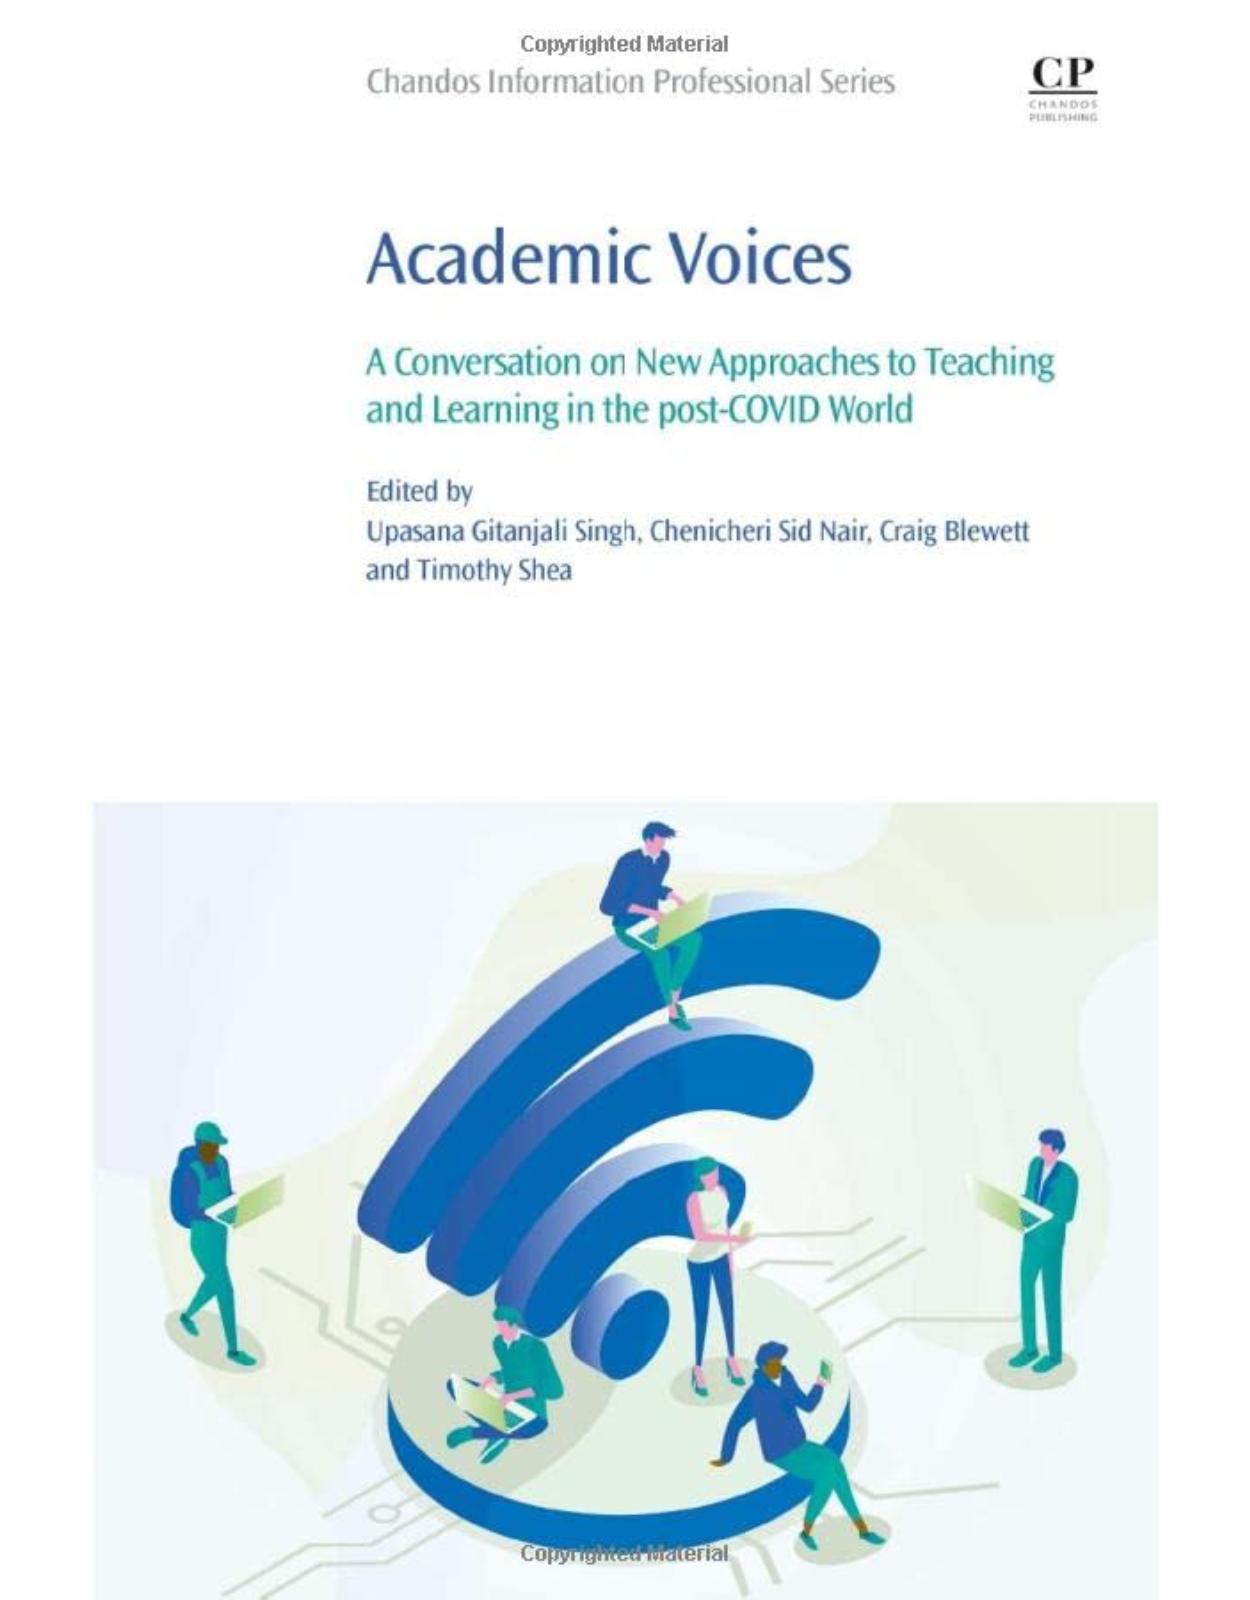 Academic Voices: A Conversation on New Approaches to Teaching and Learning in the post-COVID World